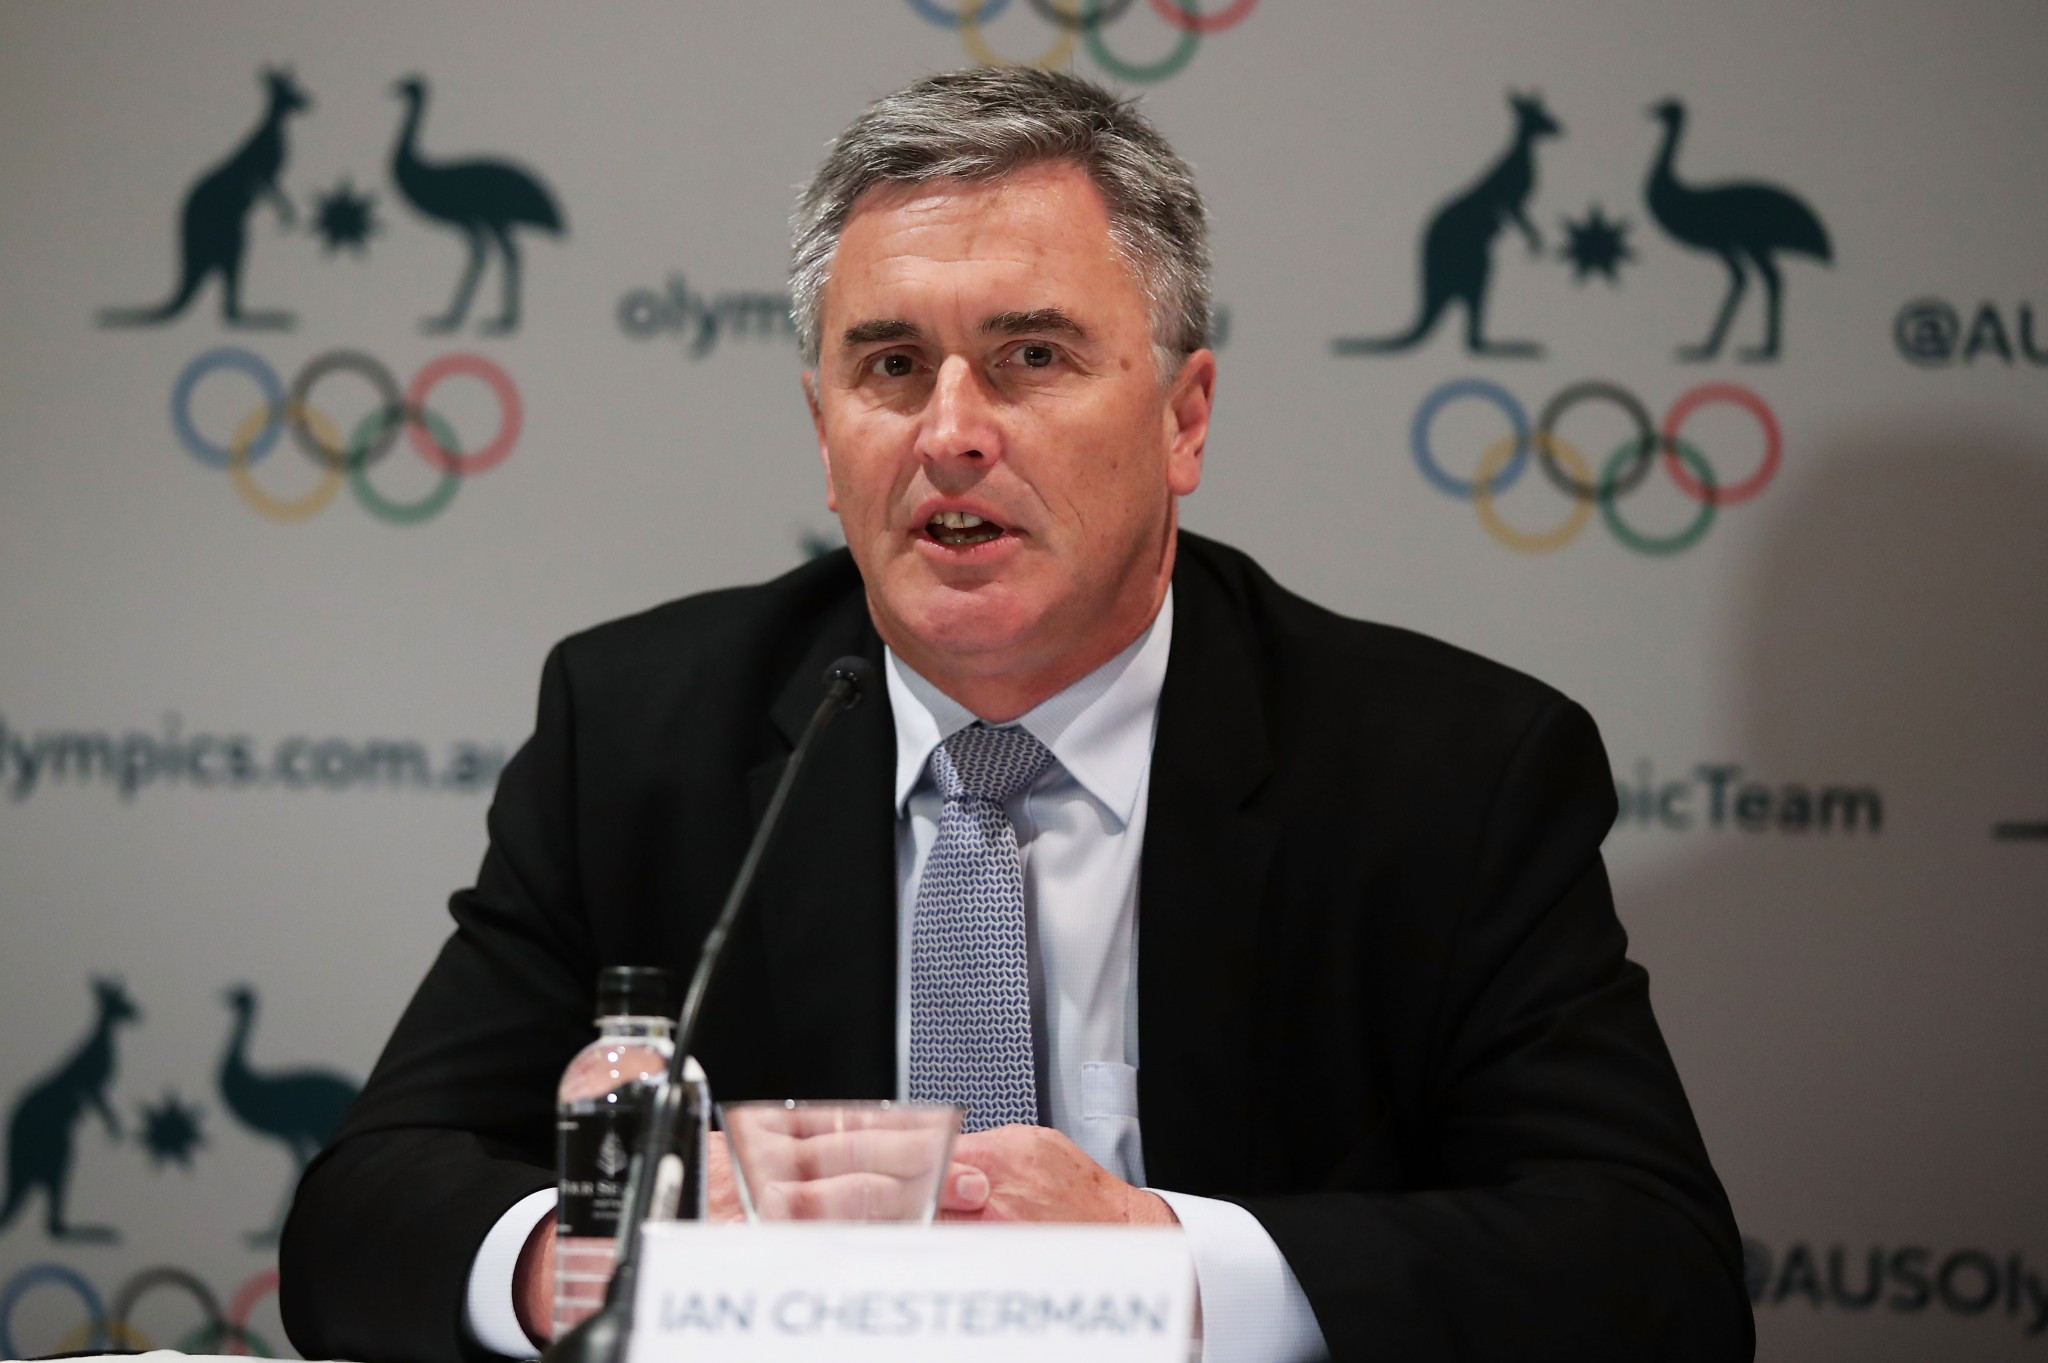 Ian Chesterman has been appointed Chef de Mission of Australia's team for Tokyo 2020 ©Getty Images